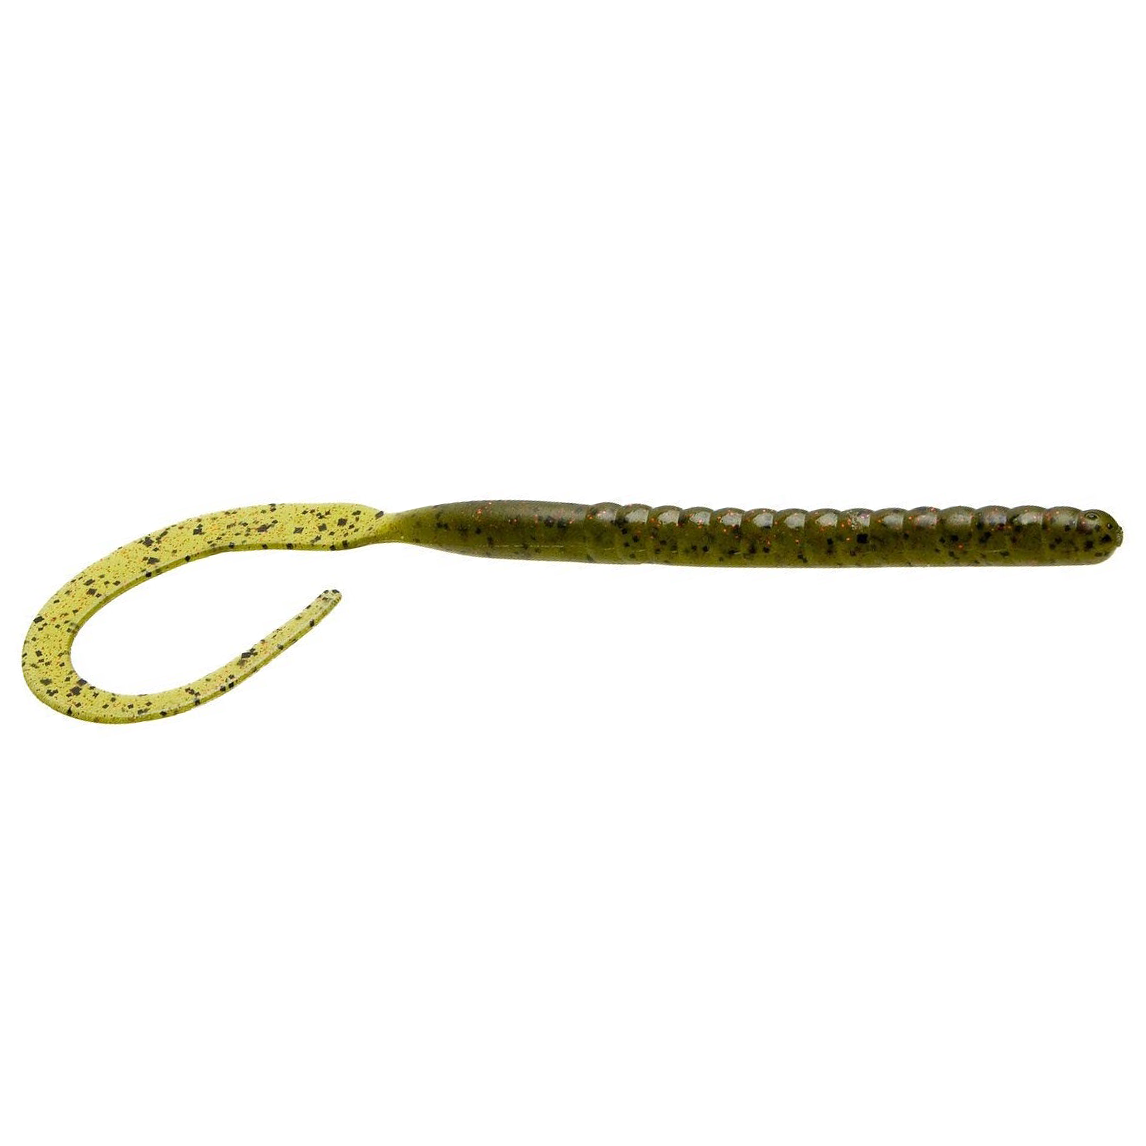 Bob Downey's Expert Tips for Fishing the Texas Rigged Worm Like